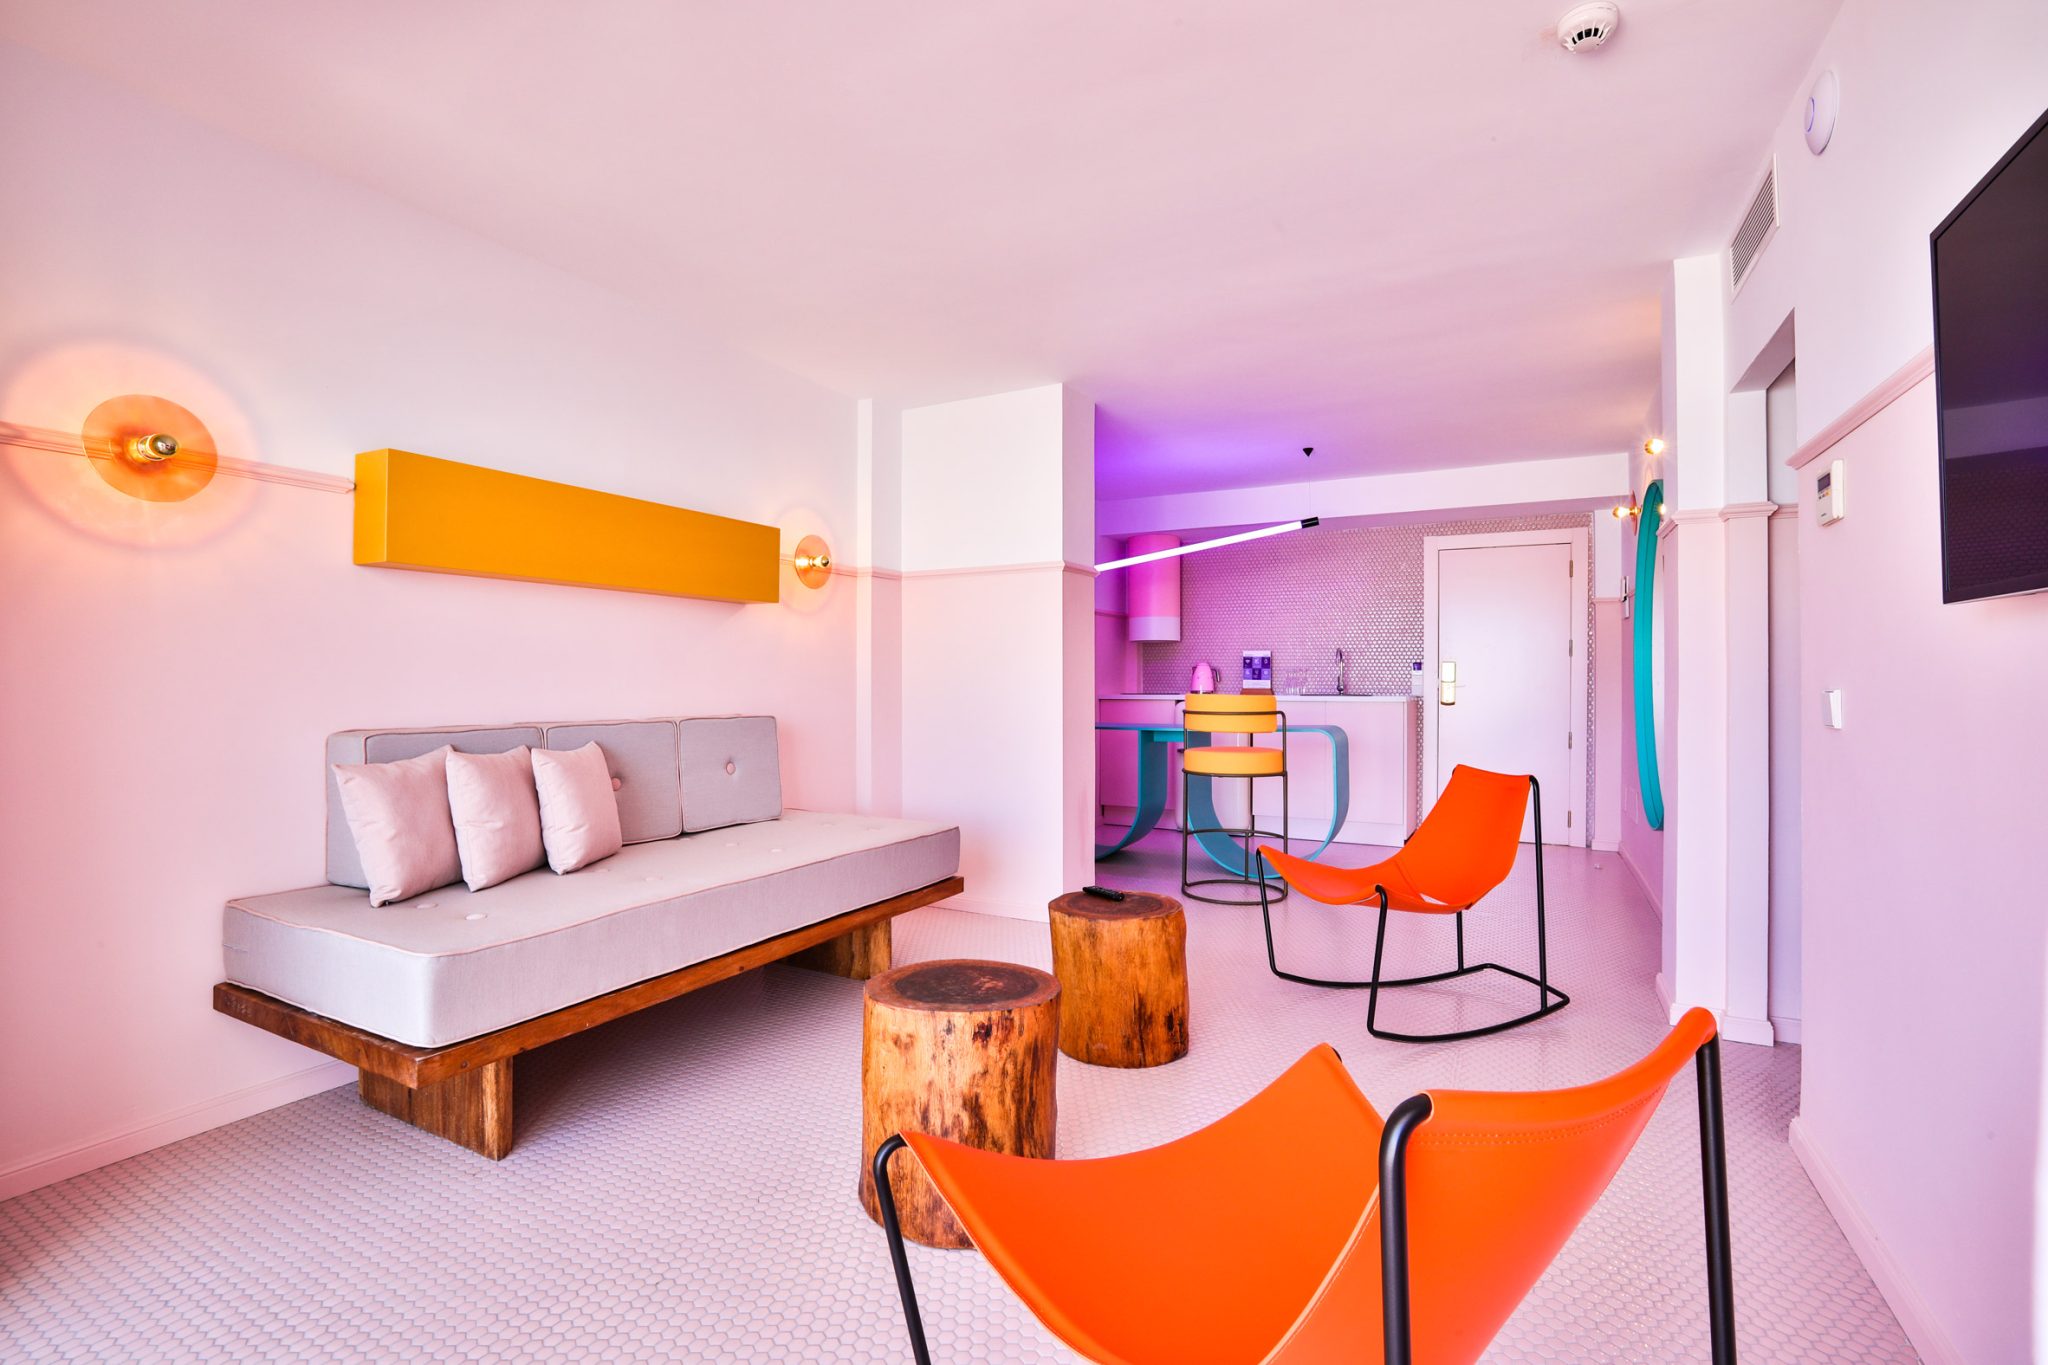 memphis style hotel room in pink and orange tones